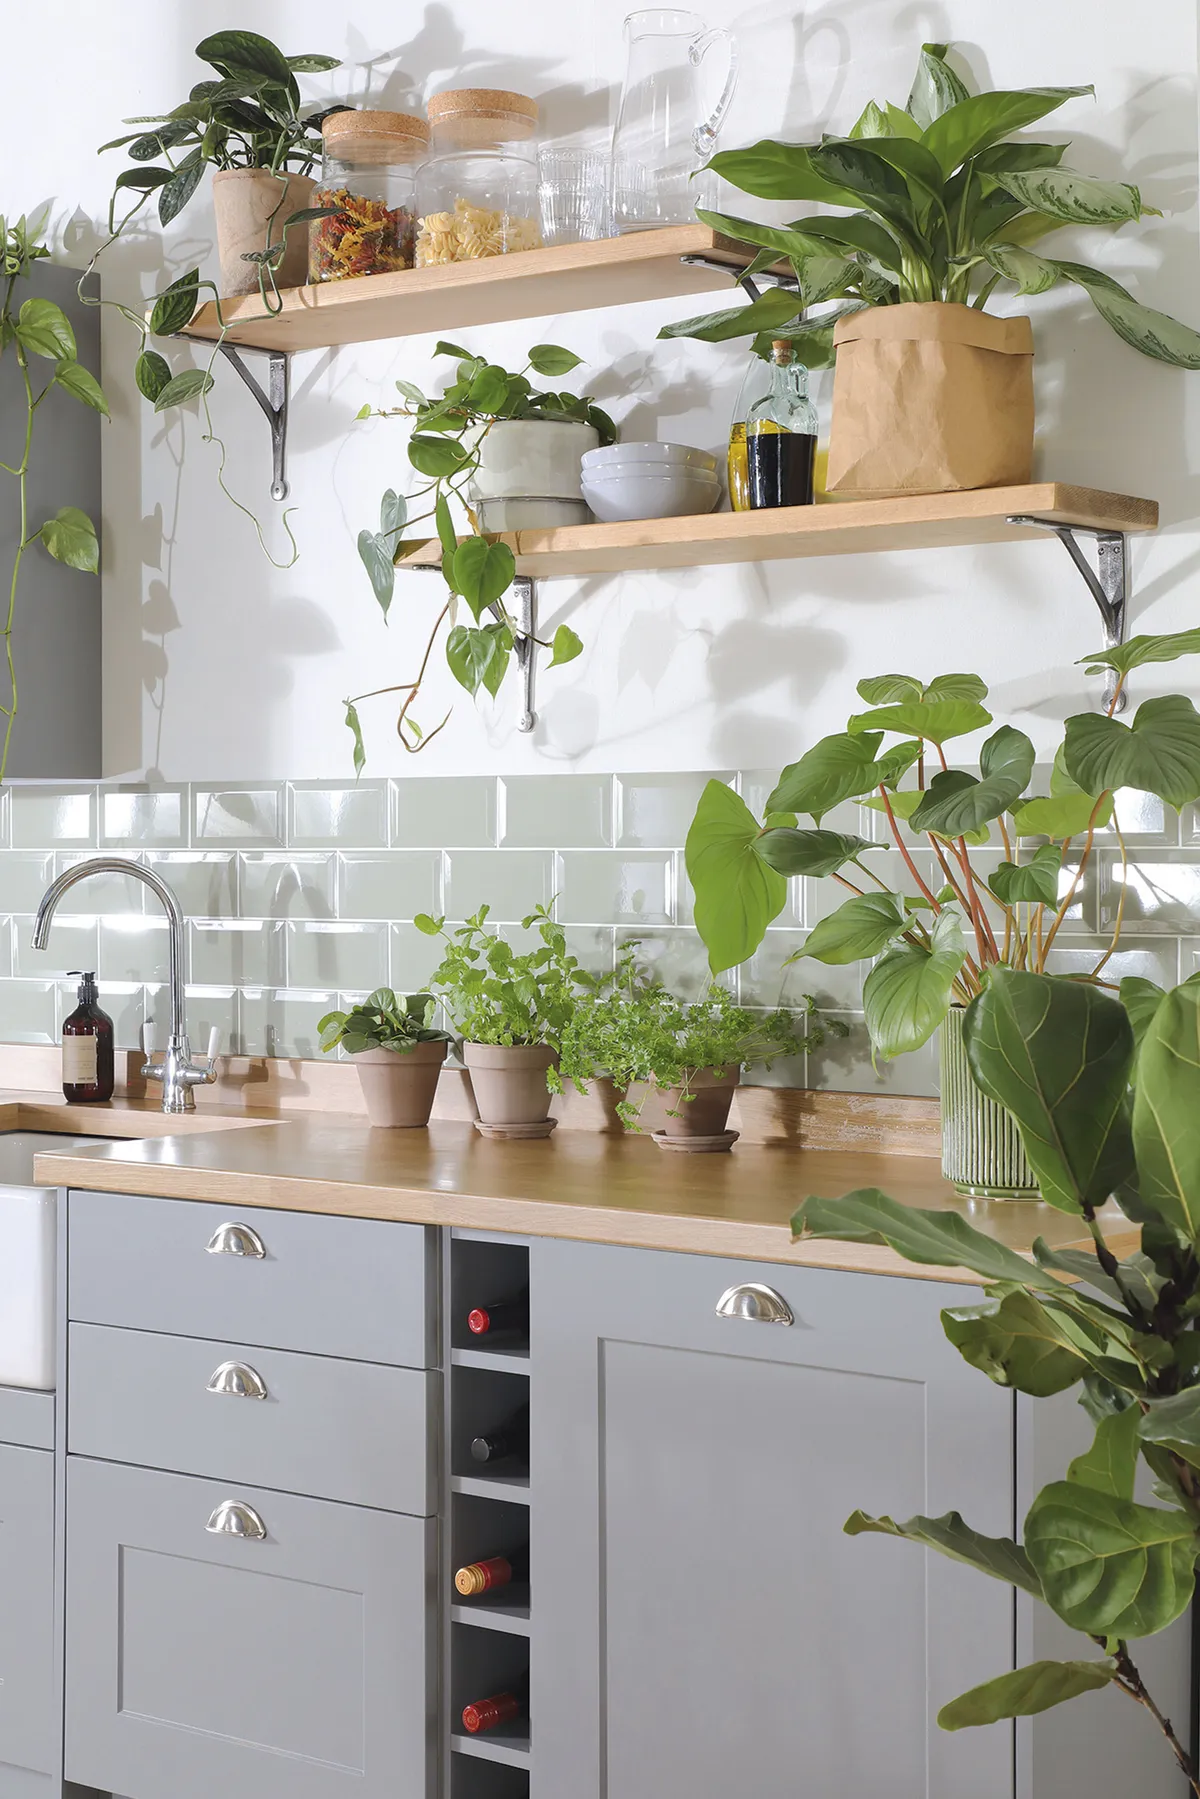 Green houseplants will boost your scheme and your wellbeing too